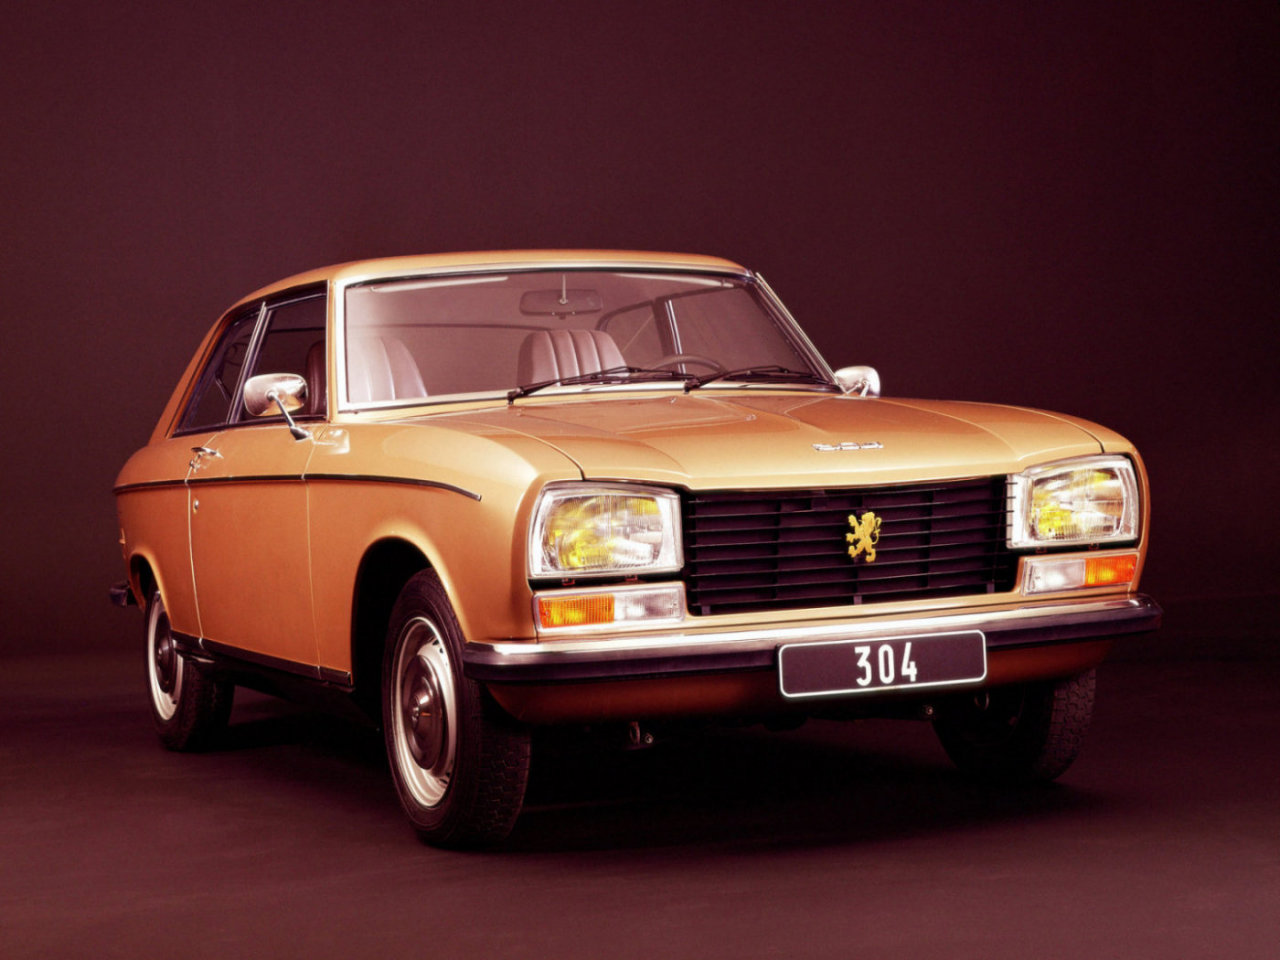 1970 Peugeot 304 Coupe